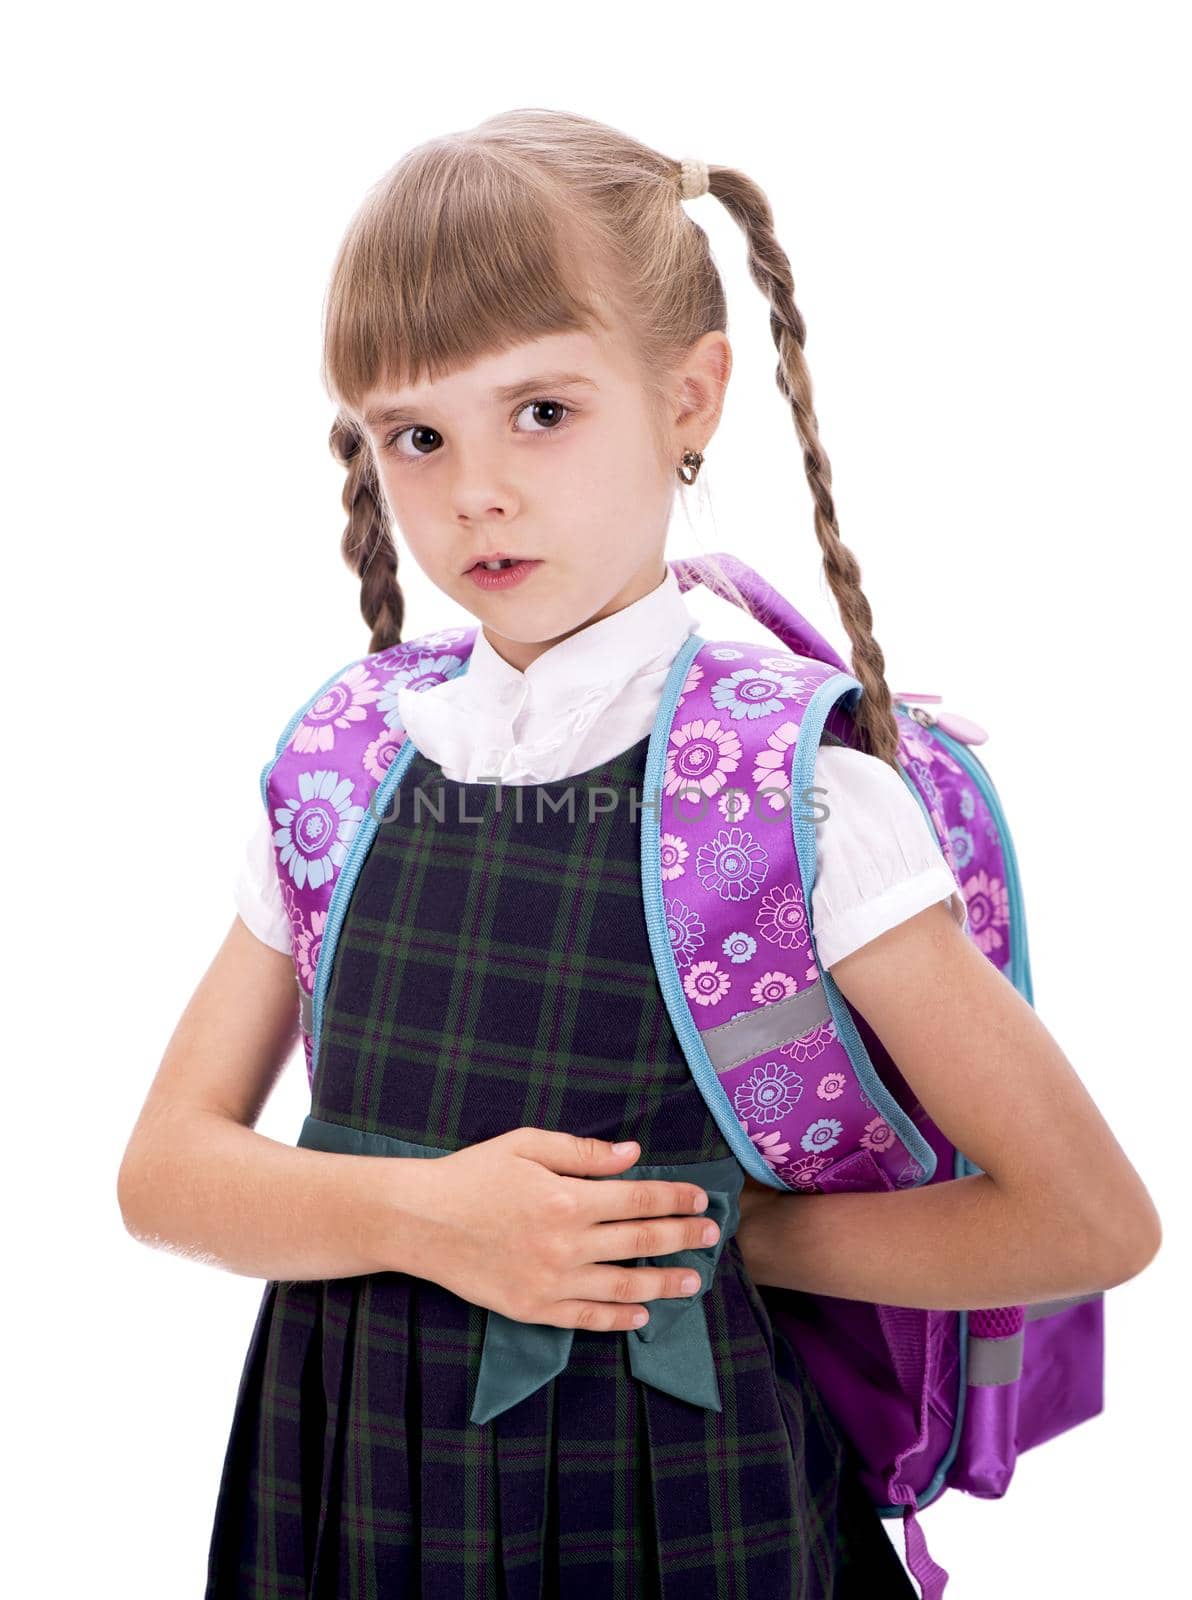 Adorable little schoolgirl with happy smile keeping arms crossed. Small schoolgirl looking nice in school uniform. Cute schoolgirl with long brunette hair and charming look. by aprilphoto